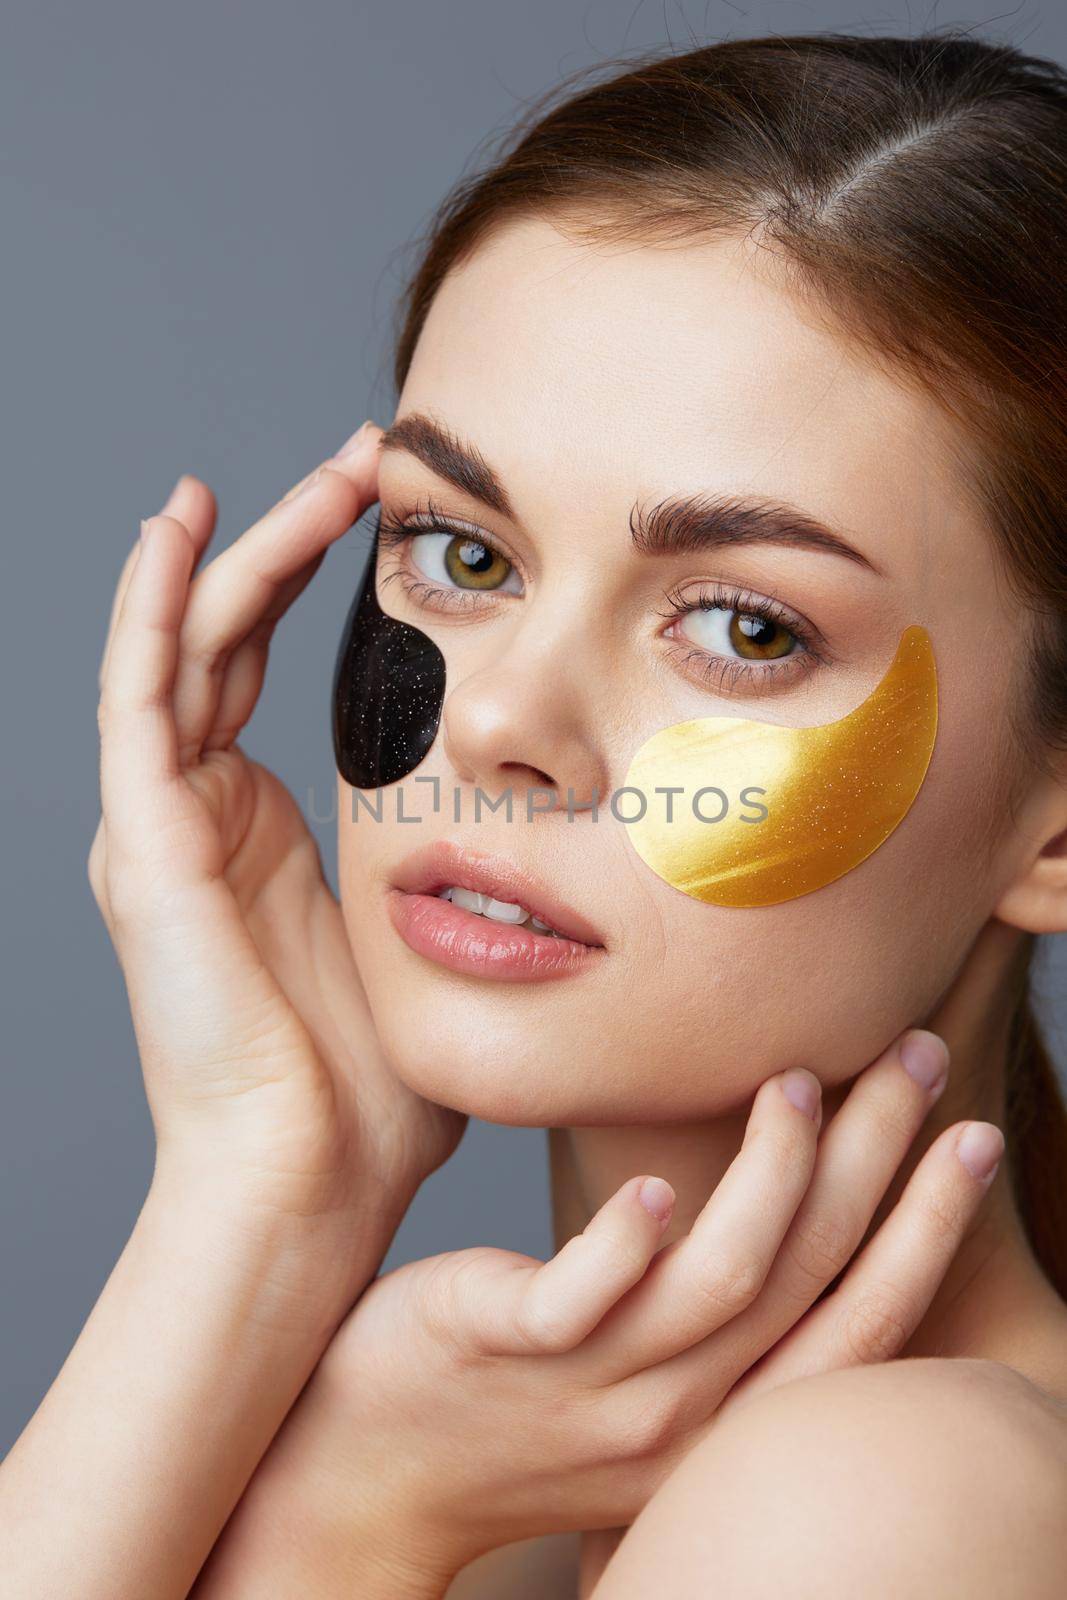 beautiful woman multicolored patches rejuvenation skin care fun close-up Lifestyle. High quality photo